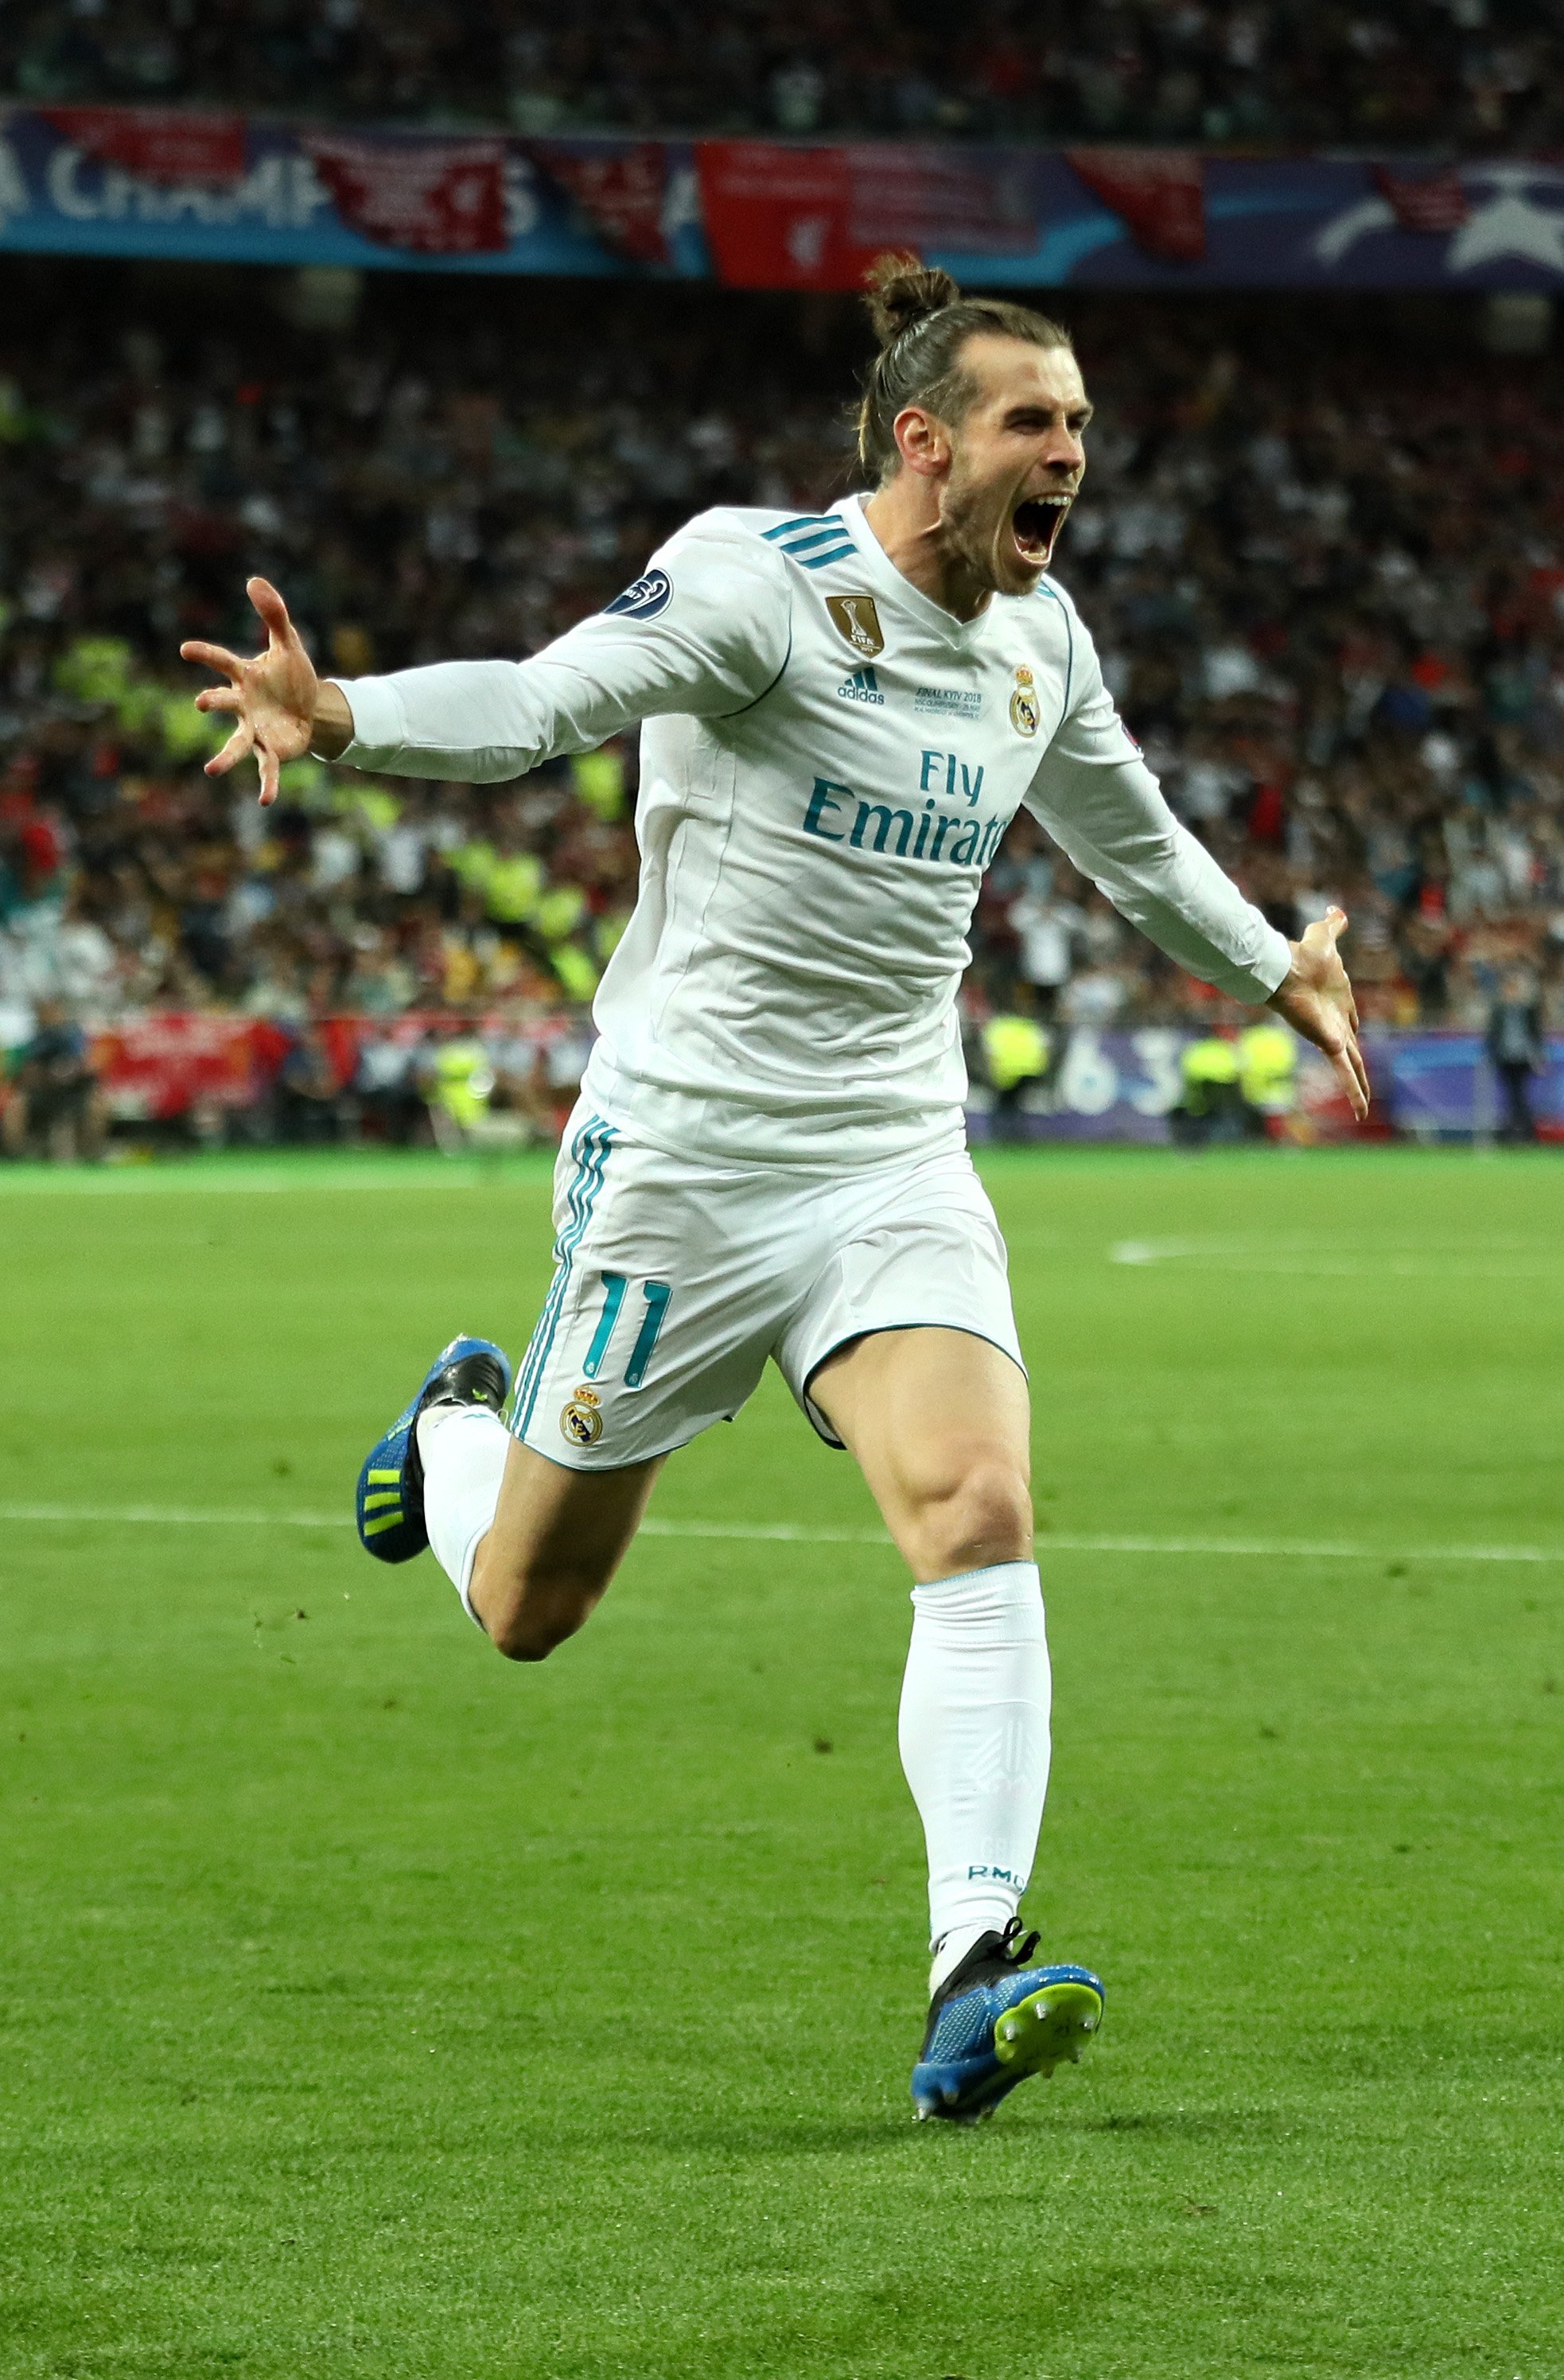 OptaJohan on Twitter: "2 - Gareth Bale is the first player to come on as a  sub and score twice in a Champions League/European Cup final. Impact.  https://t.co/Nk9wboiZEF" / Twitter